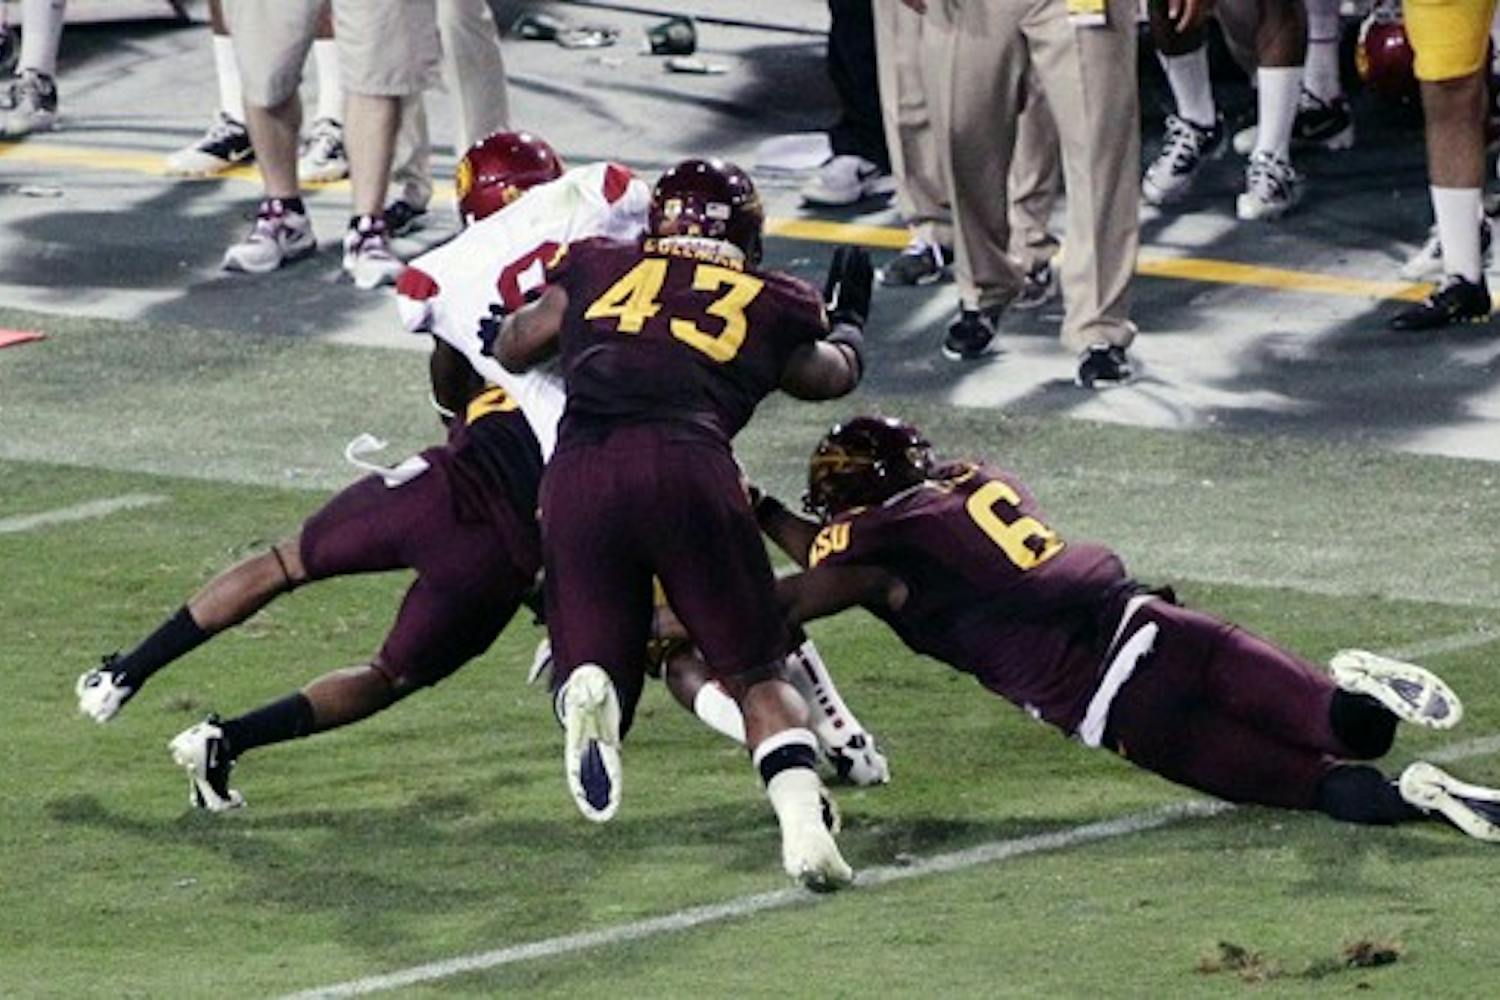 HELPING OUT: Sophomore defensive end Davon Coleman helps tackle a USC ball carrier during the Sun Devils’ 43-22 win over the Trojans on Saturday. Coleman is emerging as a force on defense this season since transferring from Fort Scott Community College in Kansas. (Photo by Beth Easterbrook)